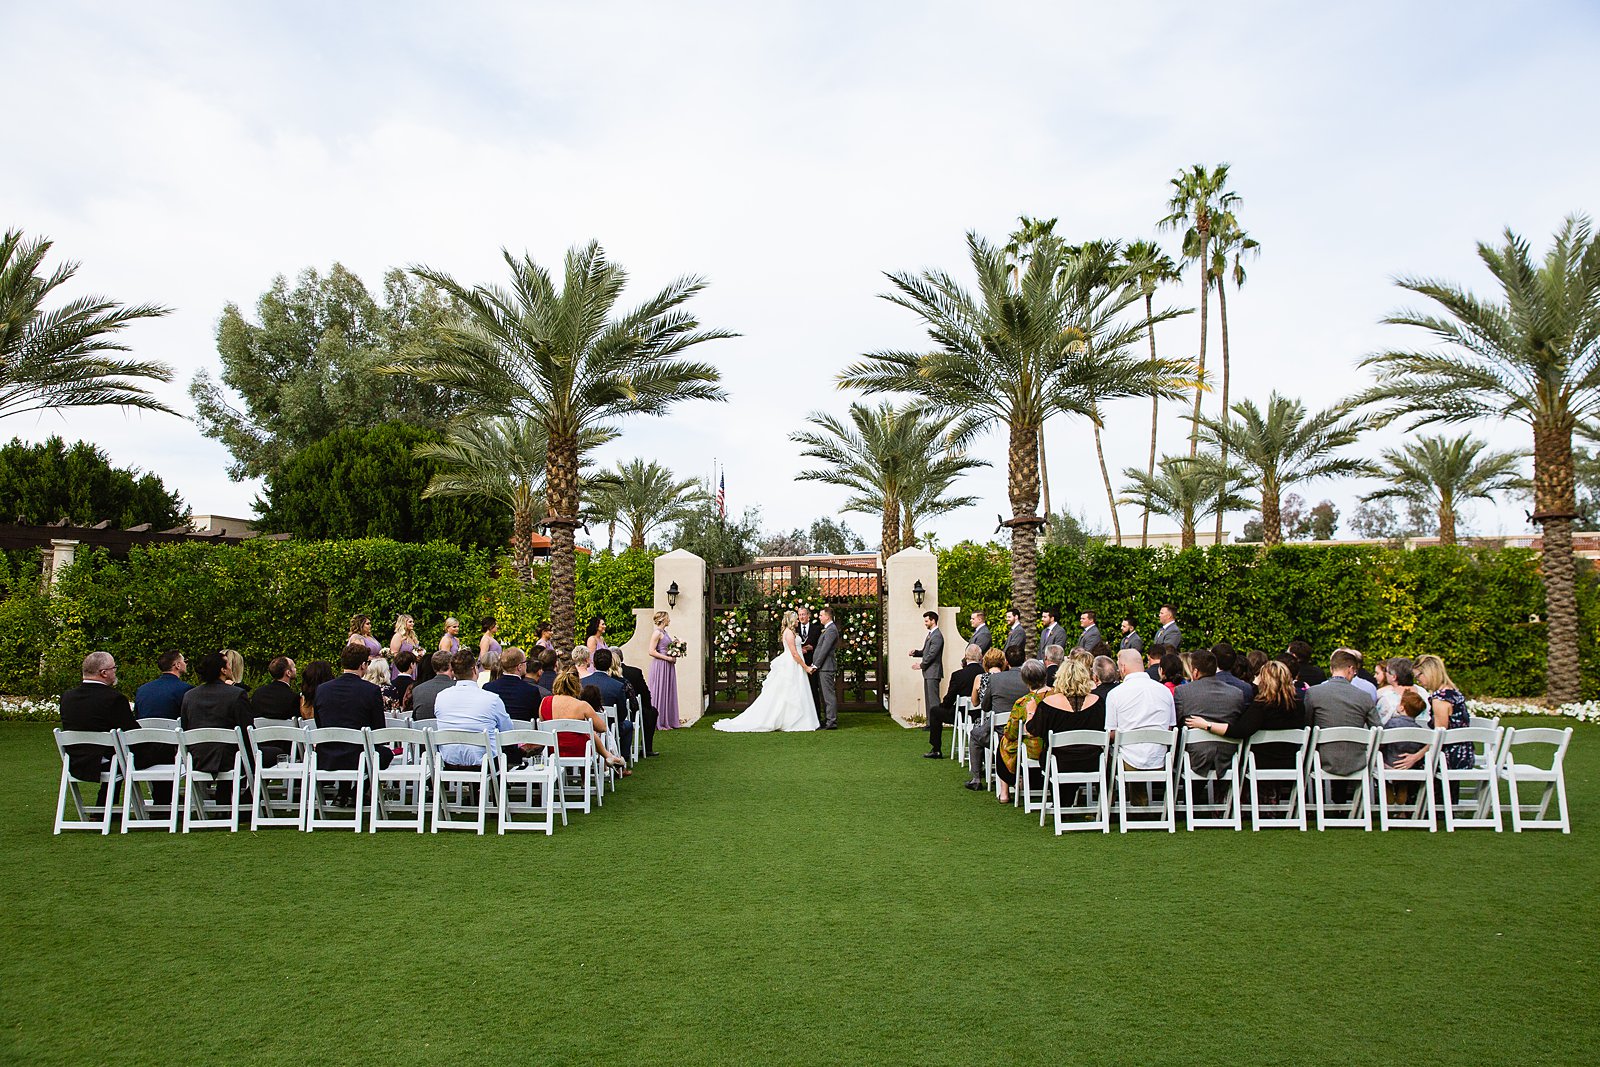 Outdoor spring wedding ceremony at The Scottsdale Resort at McCormick Ranch by Arizona wedding photographer PMA Photography.